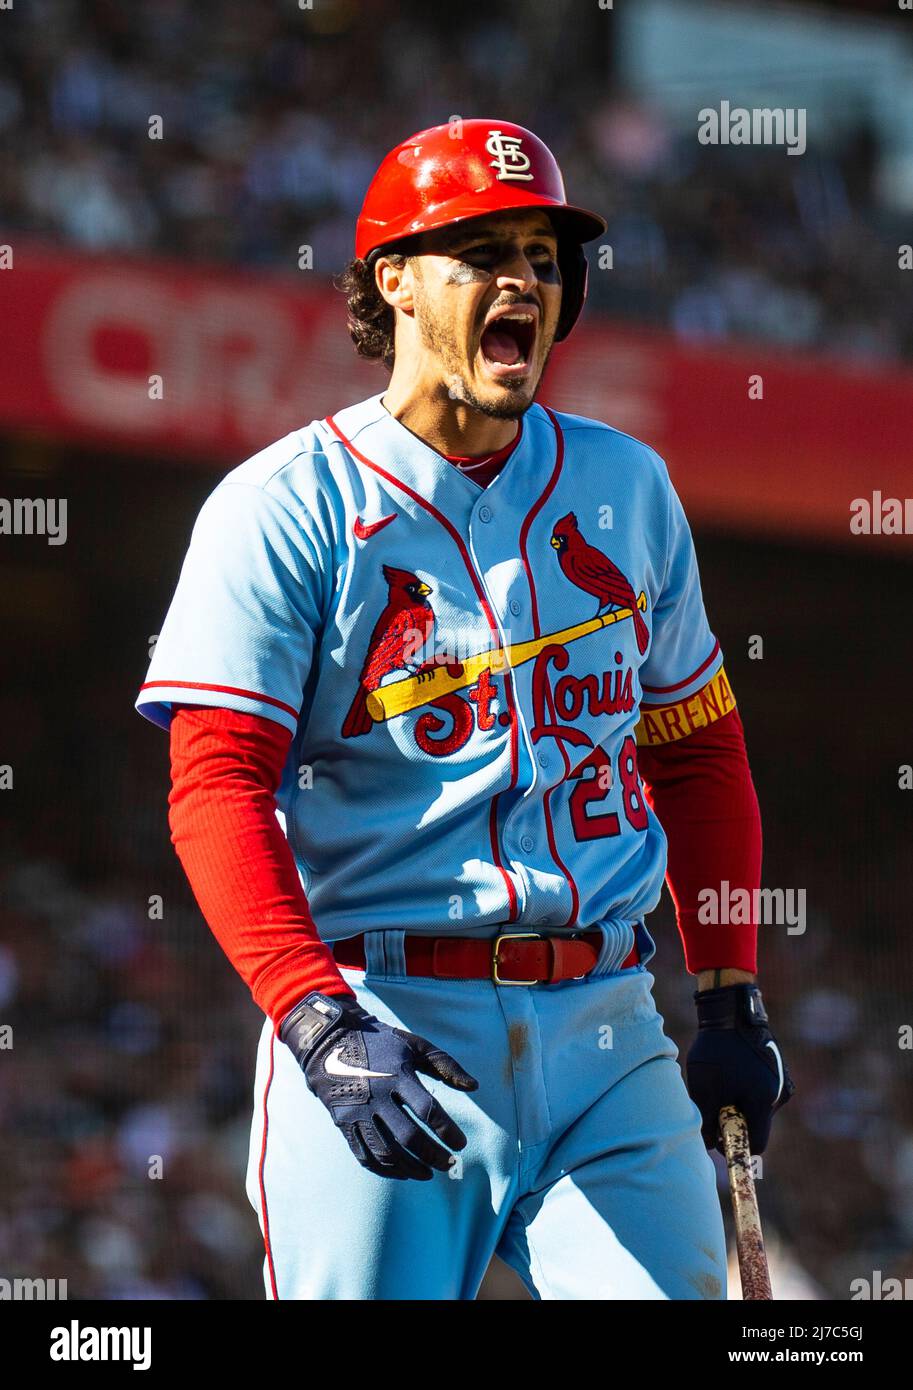 May 07 2022 San Francisco CA, U.S.A. St. Louis third baseman Nolan Arenado  (28) reacts after striking out in the ninth inning during MLB game between  the St. Louis Cardinals and the